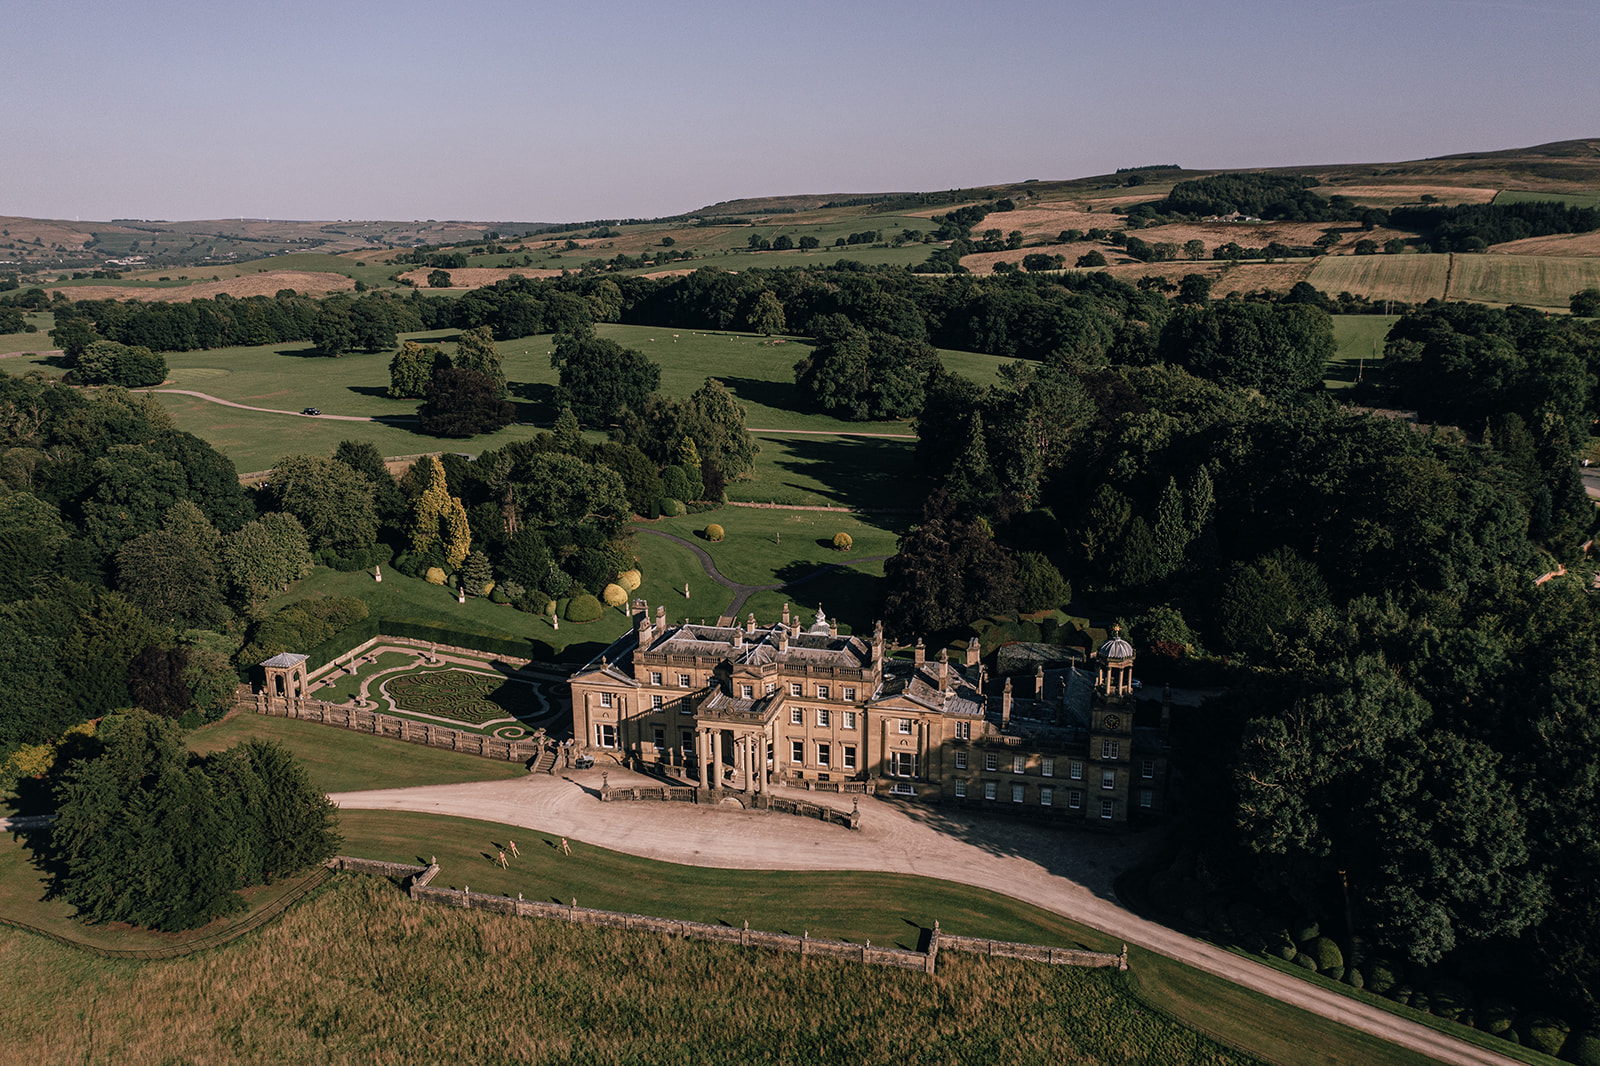 Photograph of Broughton Hall, Yorkshire